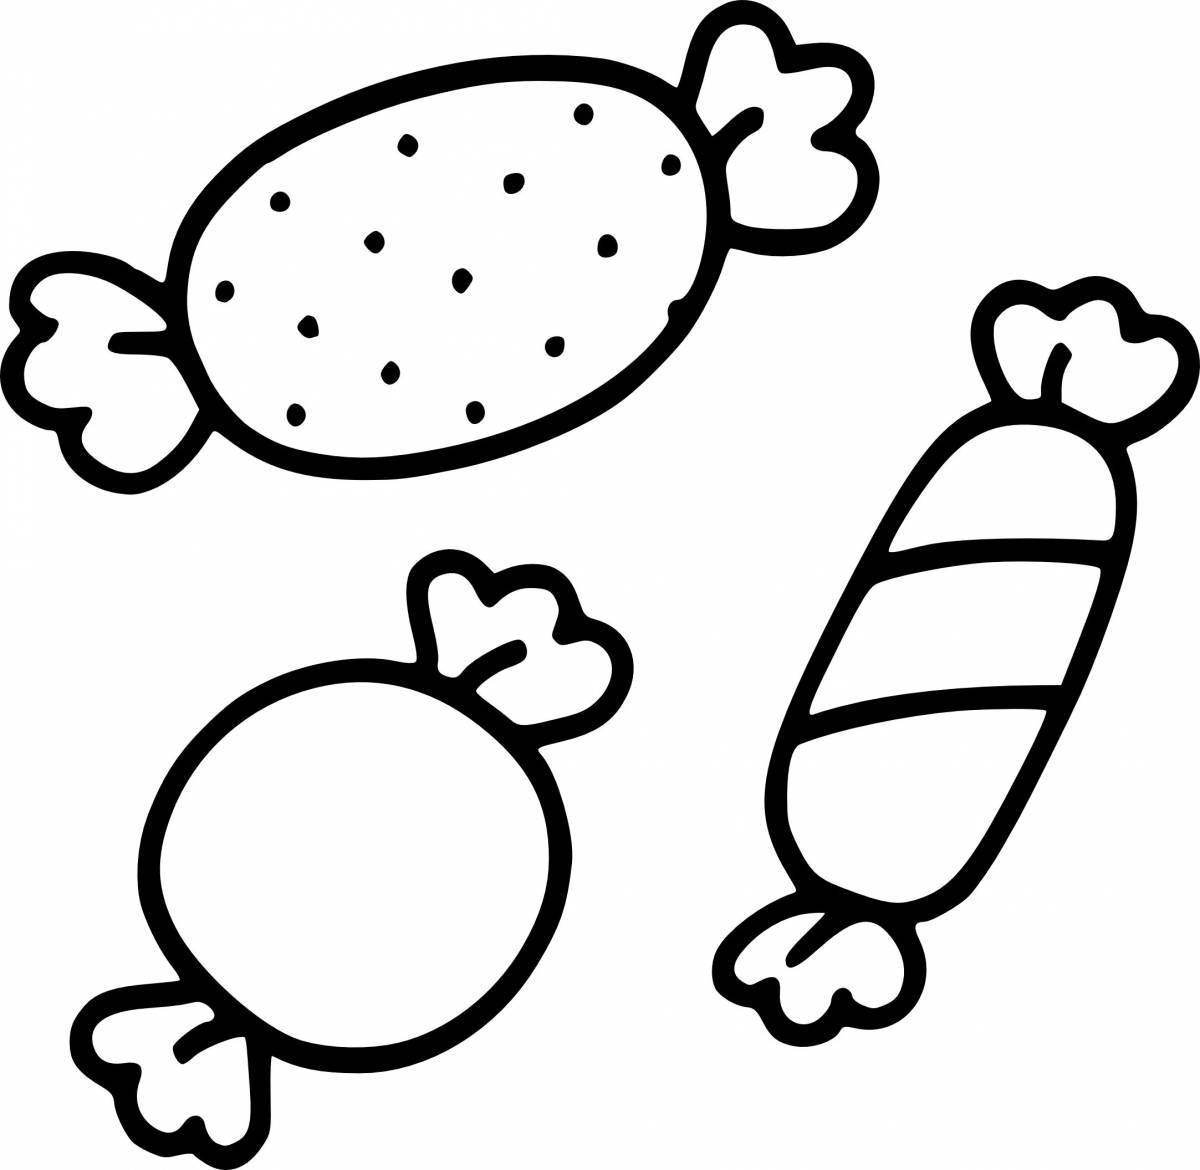 Amazing candy coloring pages for kids